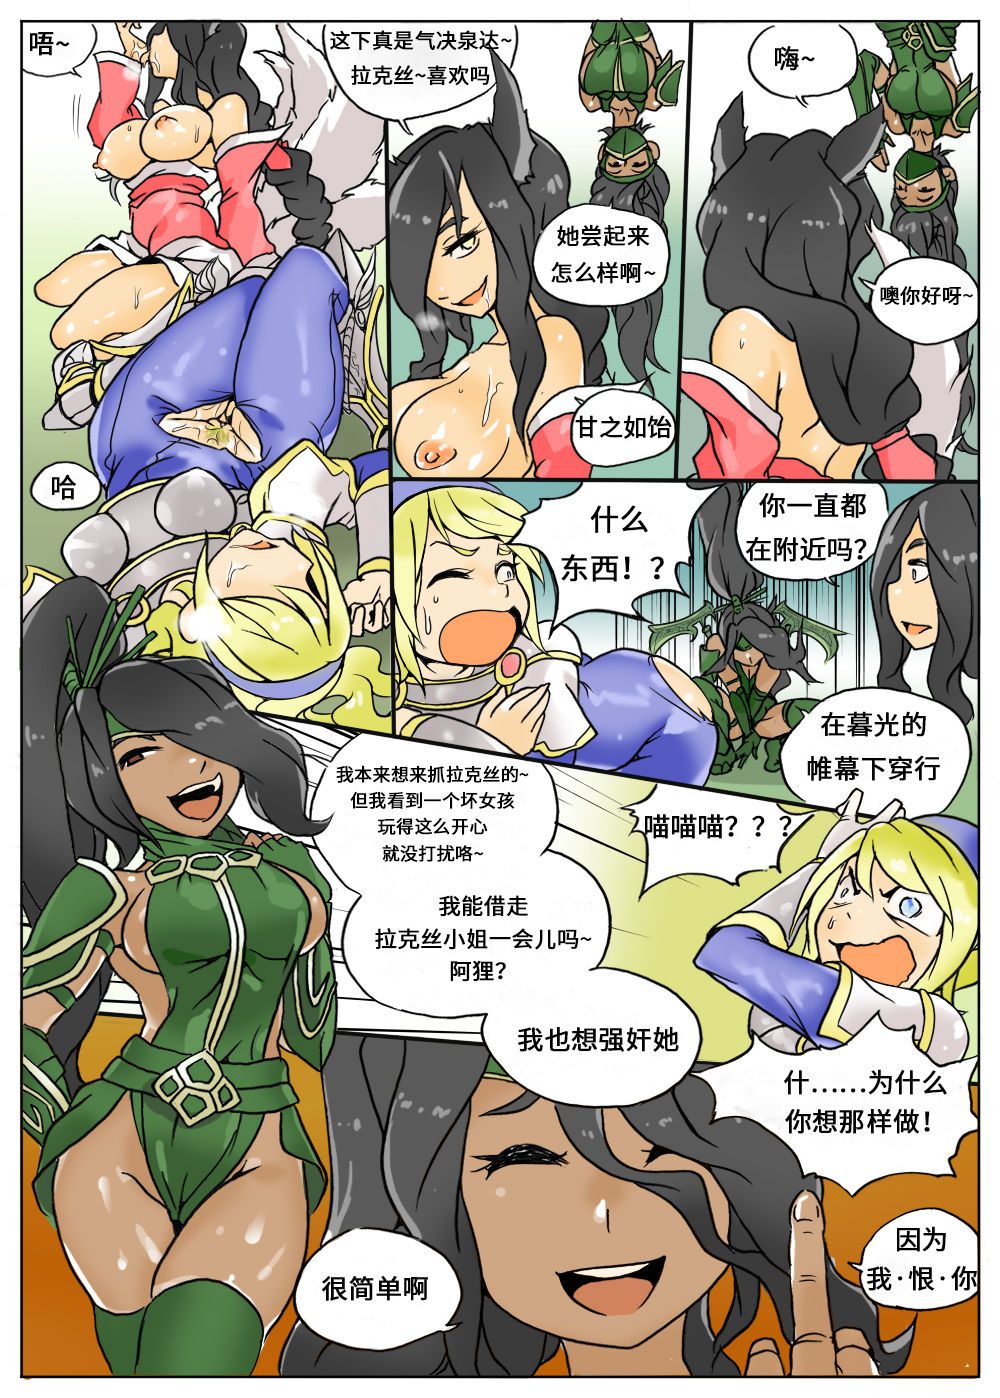 [KimMundo] Lux Gets Ganked! (League of Legends) [Chinese] [沒有漢化] 